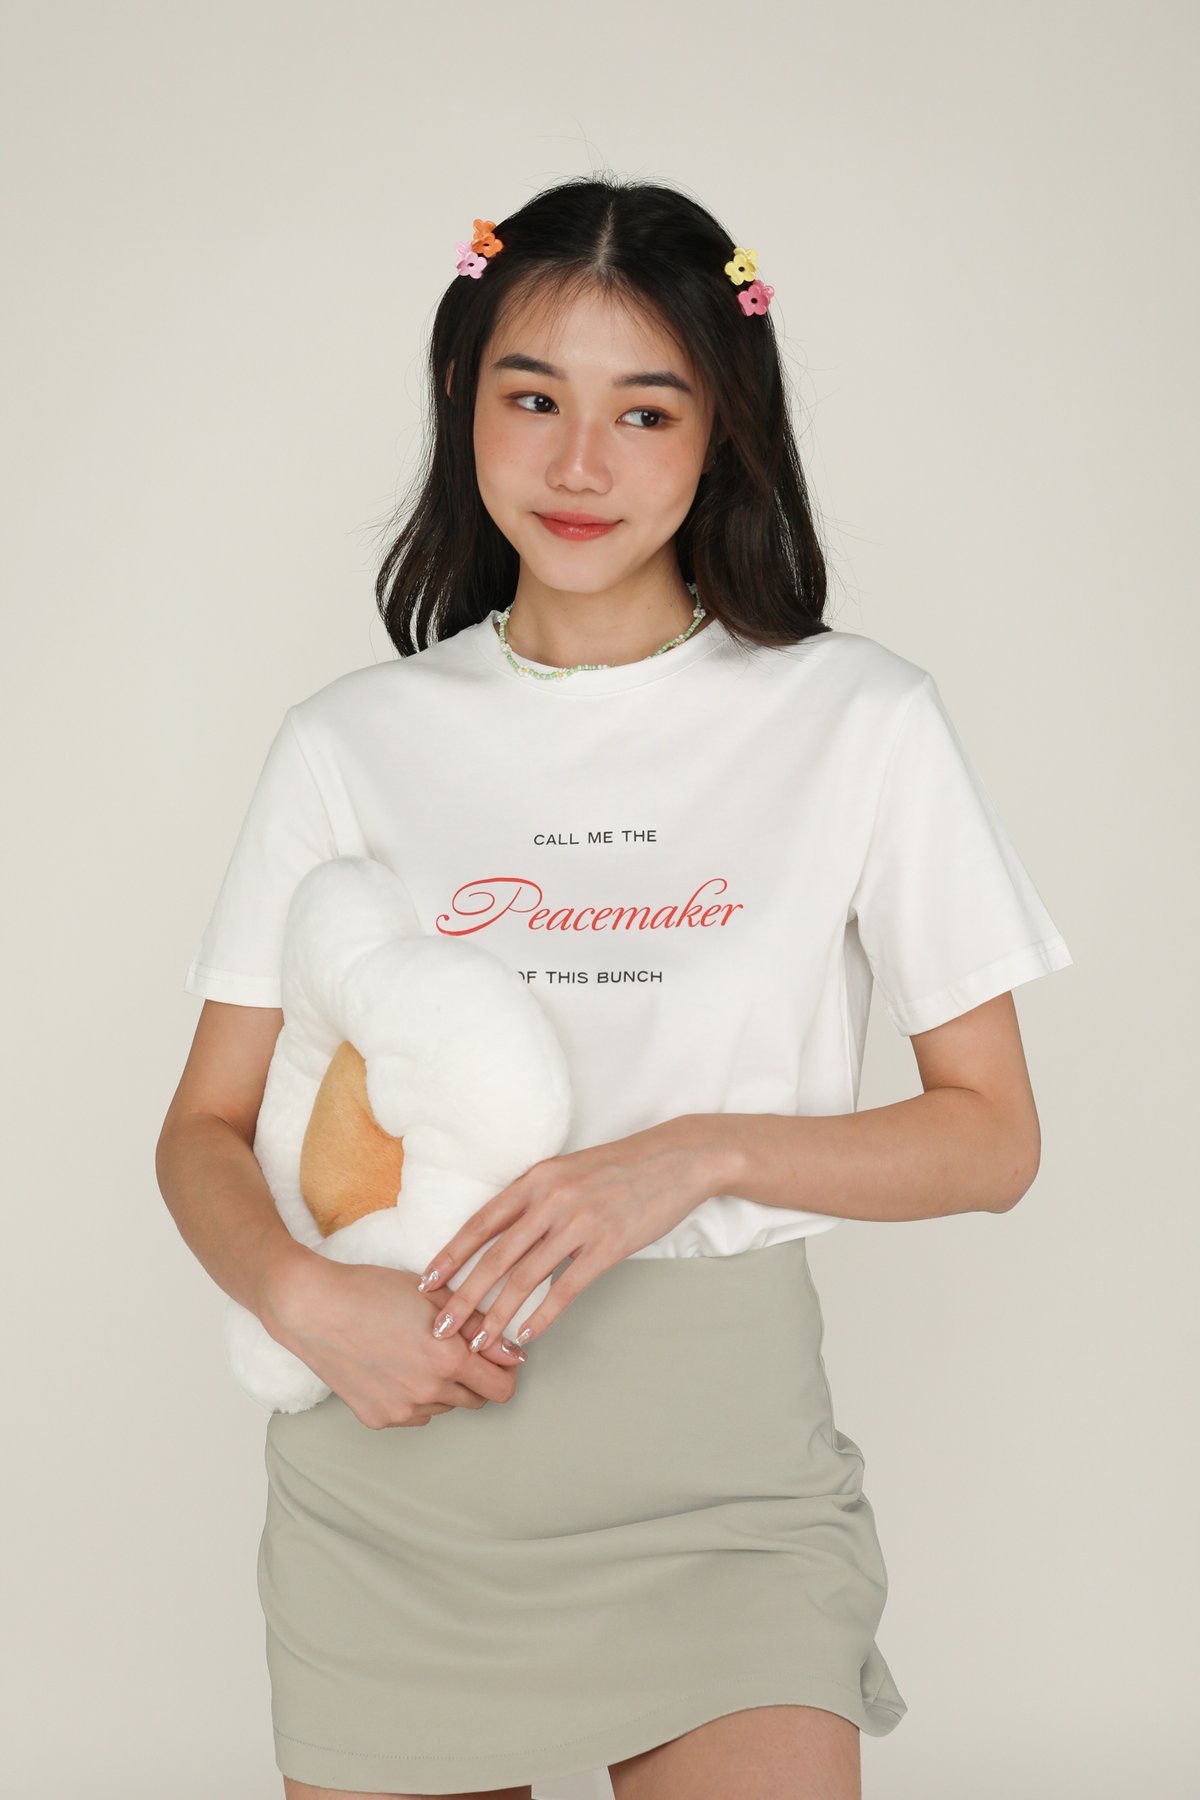 Personali-Tees - Peacemaker (White)